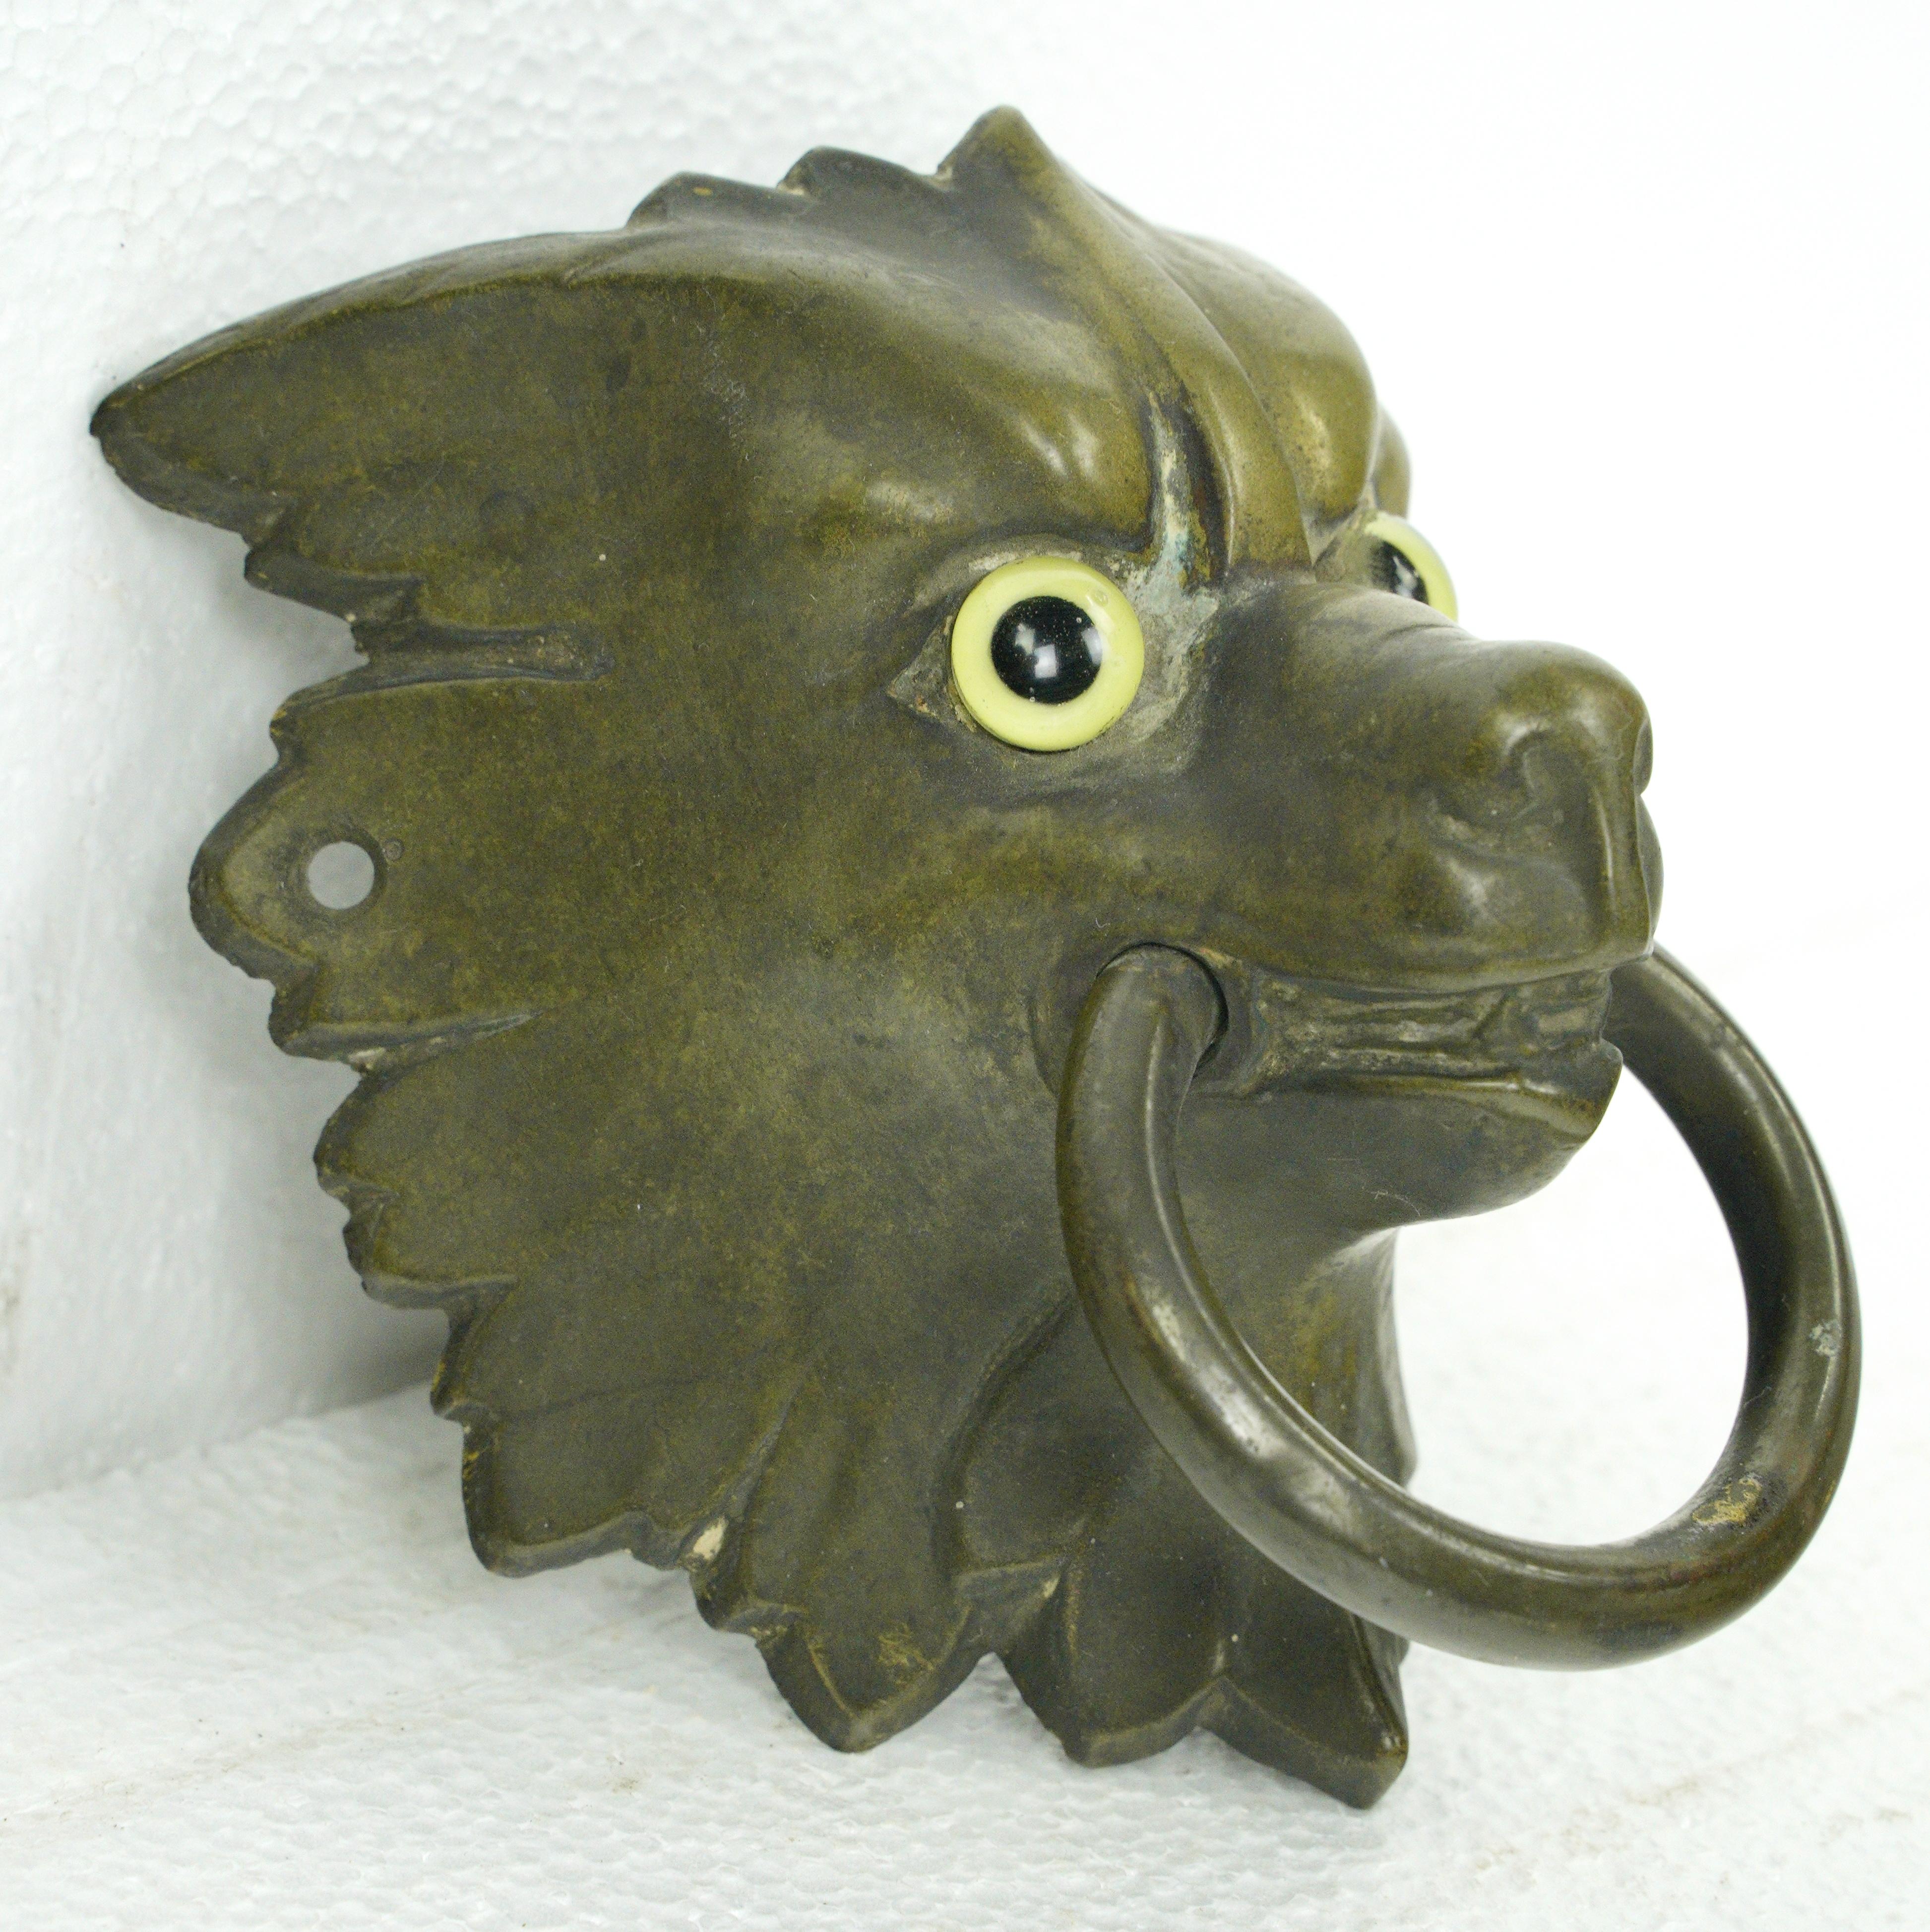 Solid bronze wolf head ring pull with piercing glass eyes. Good condition with appropriate wear from age. One available. Please note, this item is located in our Scranton, PA location.